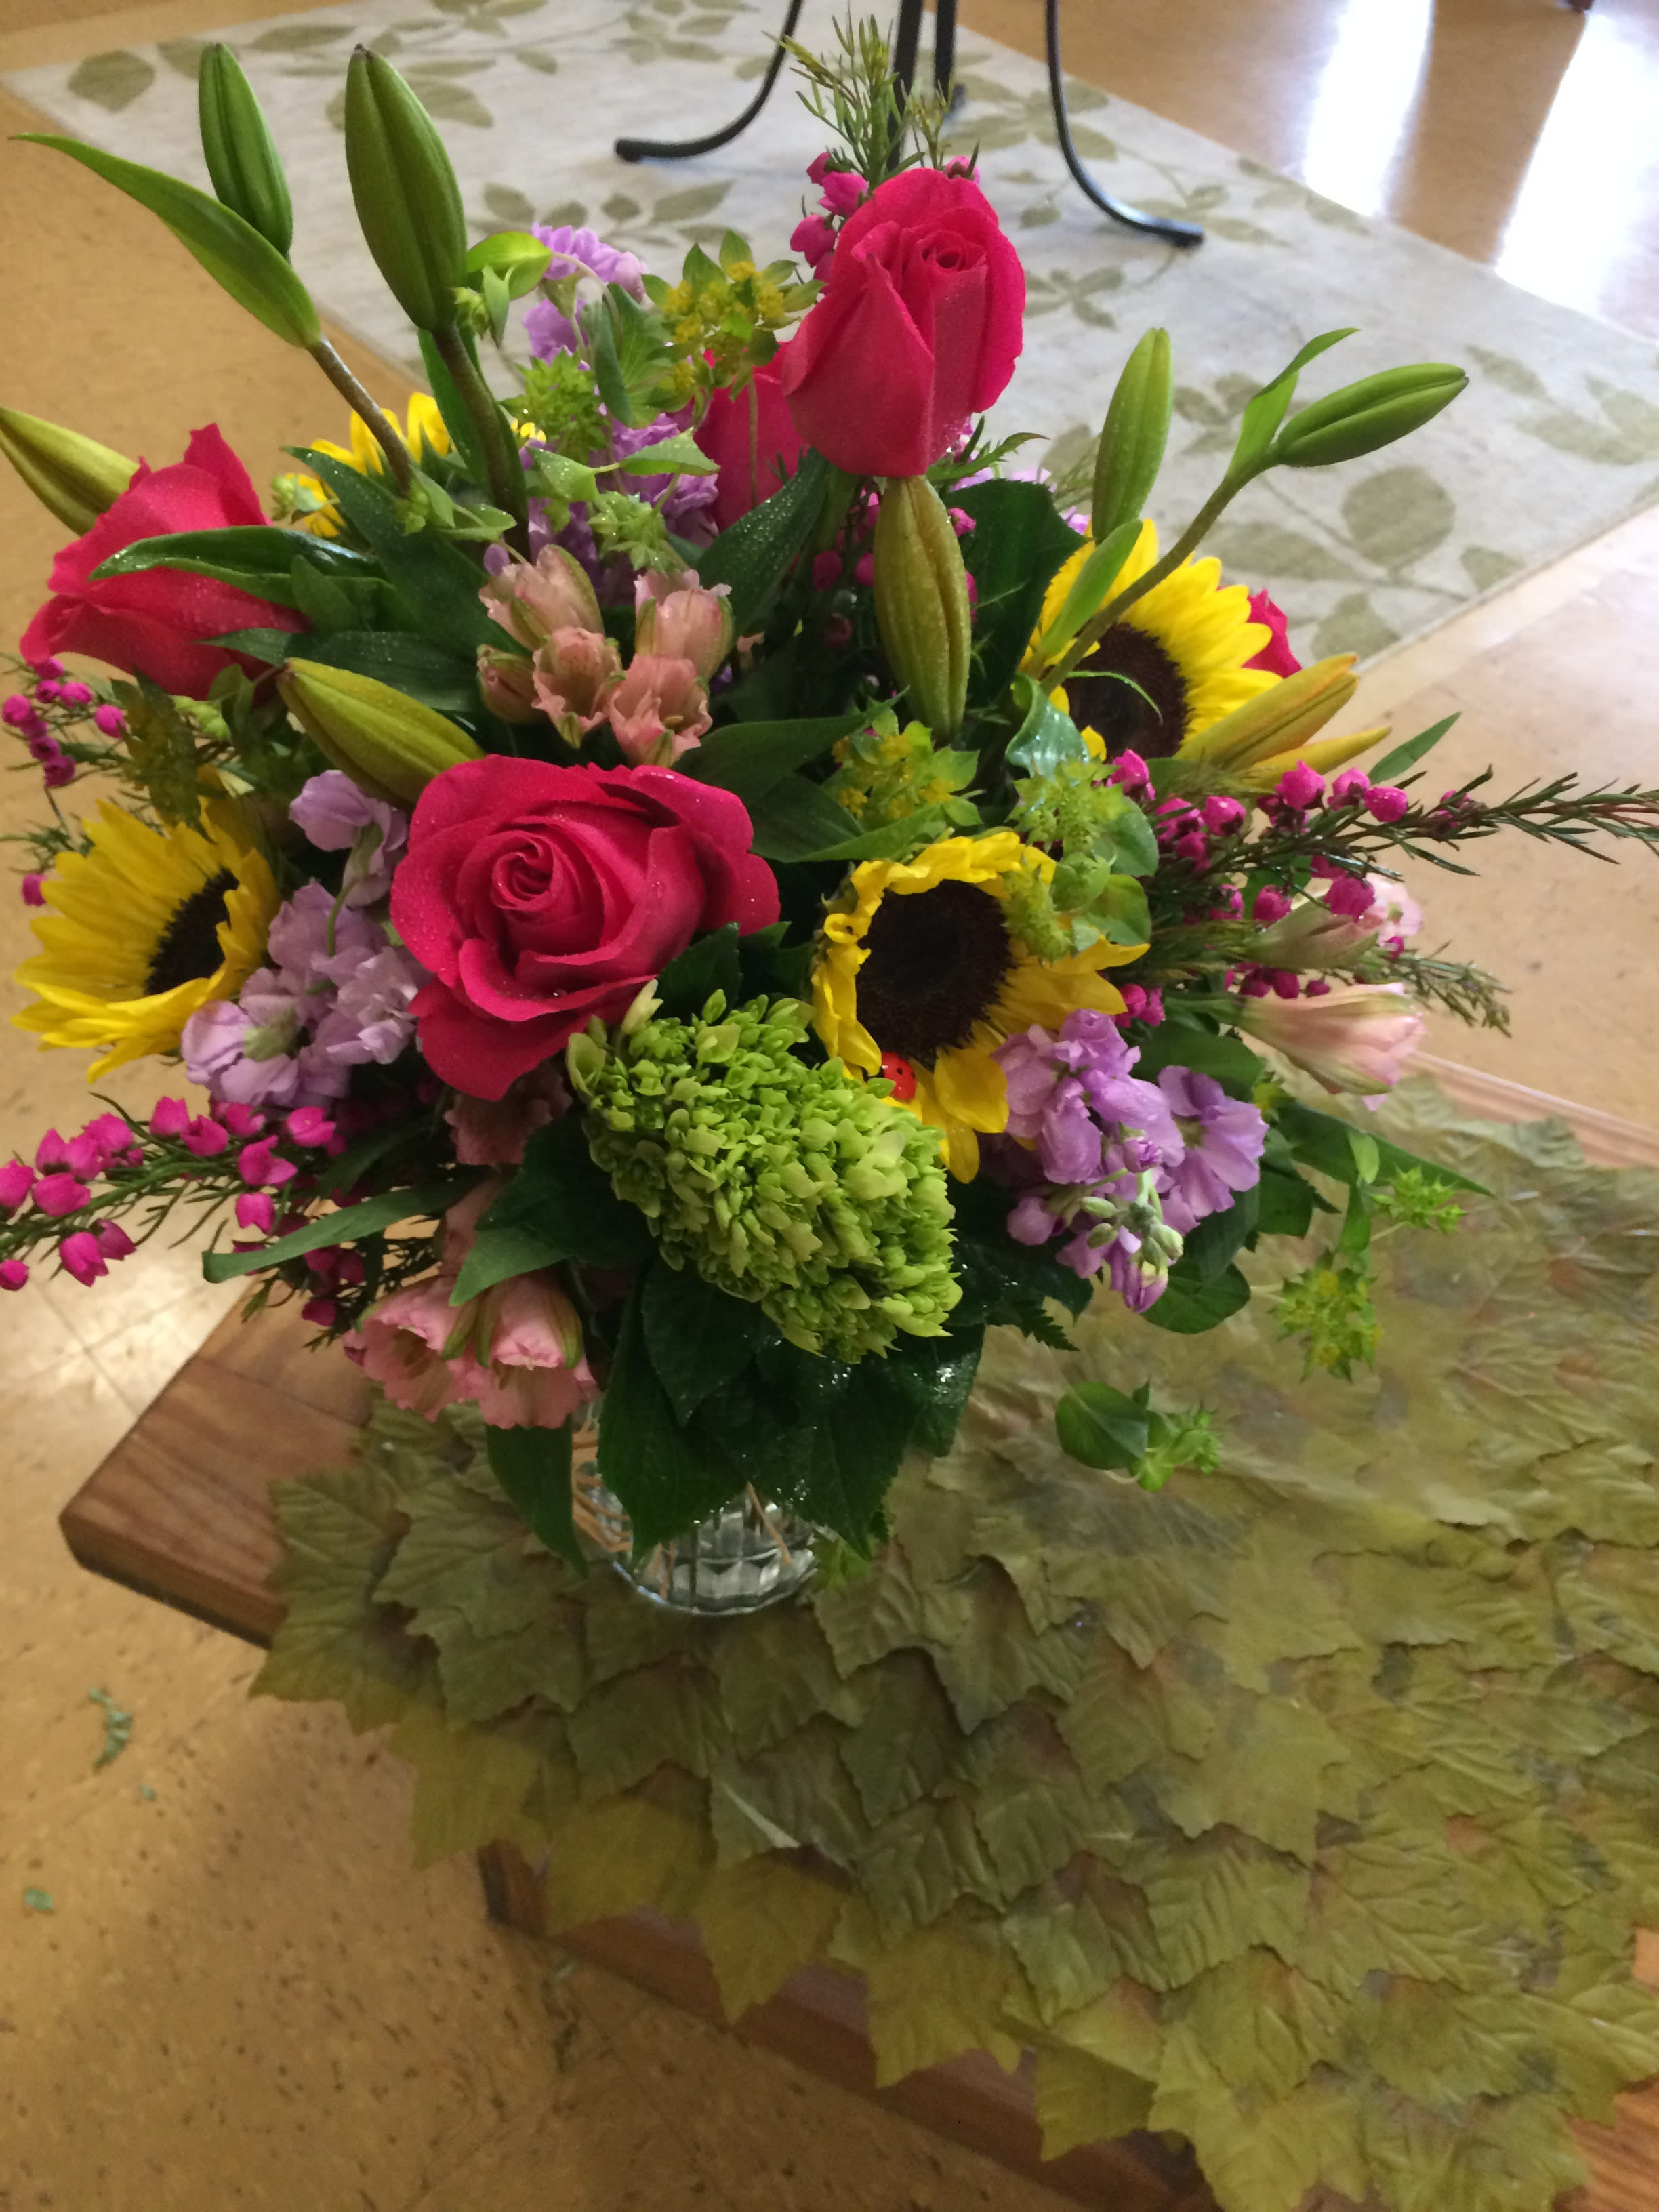 Fresh And Lovely - A bright colorful bouquet perfect for any occasion. Custommade with hot pink roses, sunflowers, and hydrangea, in a glass vase